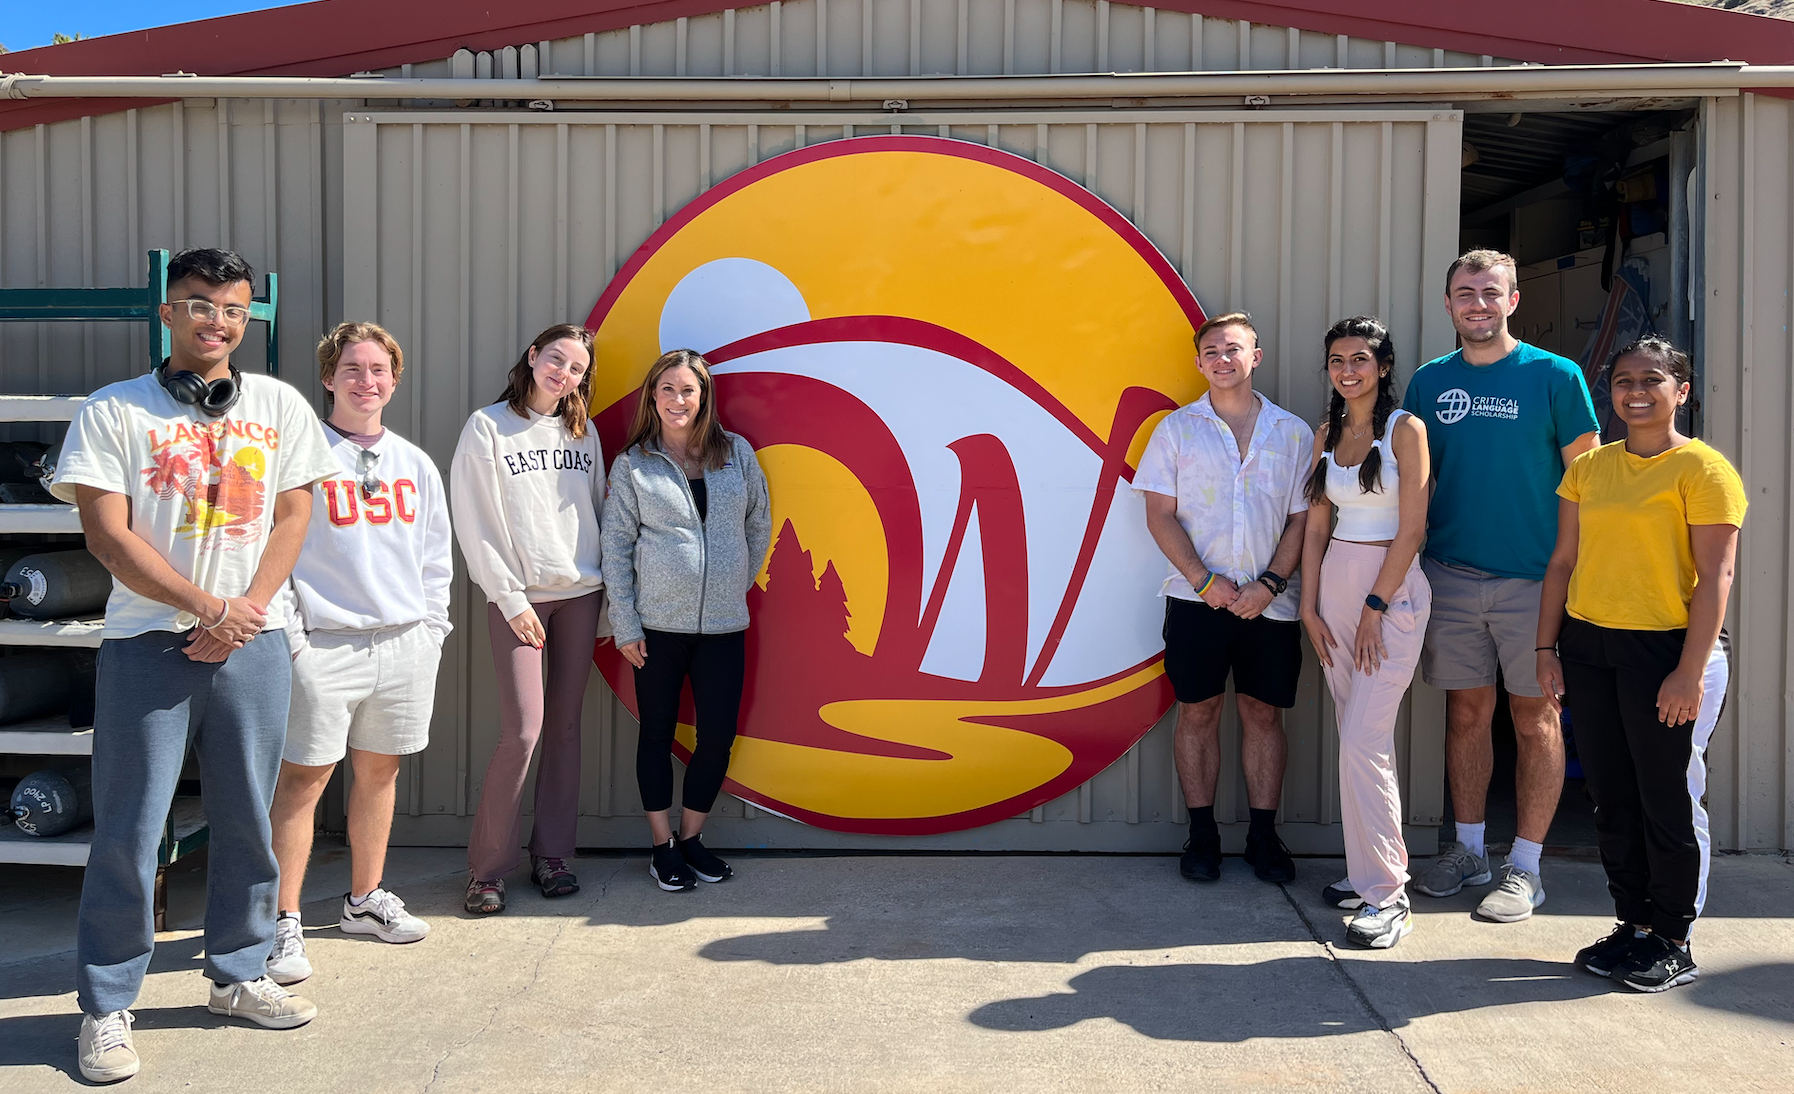 a professor and her students smile while standing in front of a large cardinal-and-gold "W" graphic on the side of a corrugated steel building